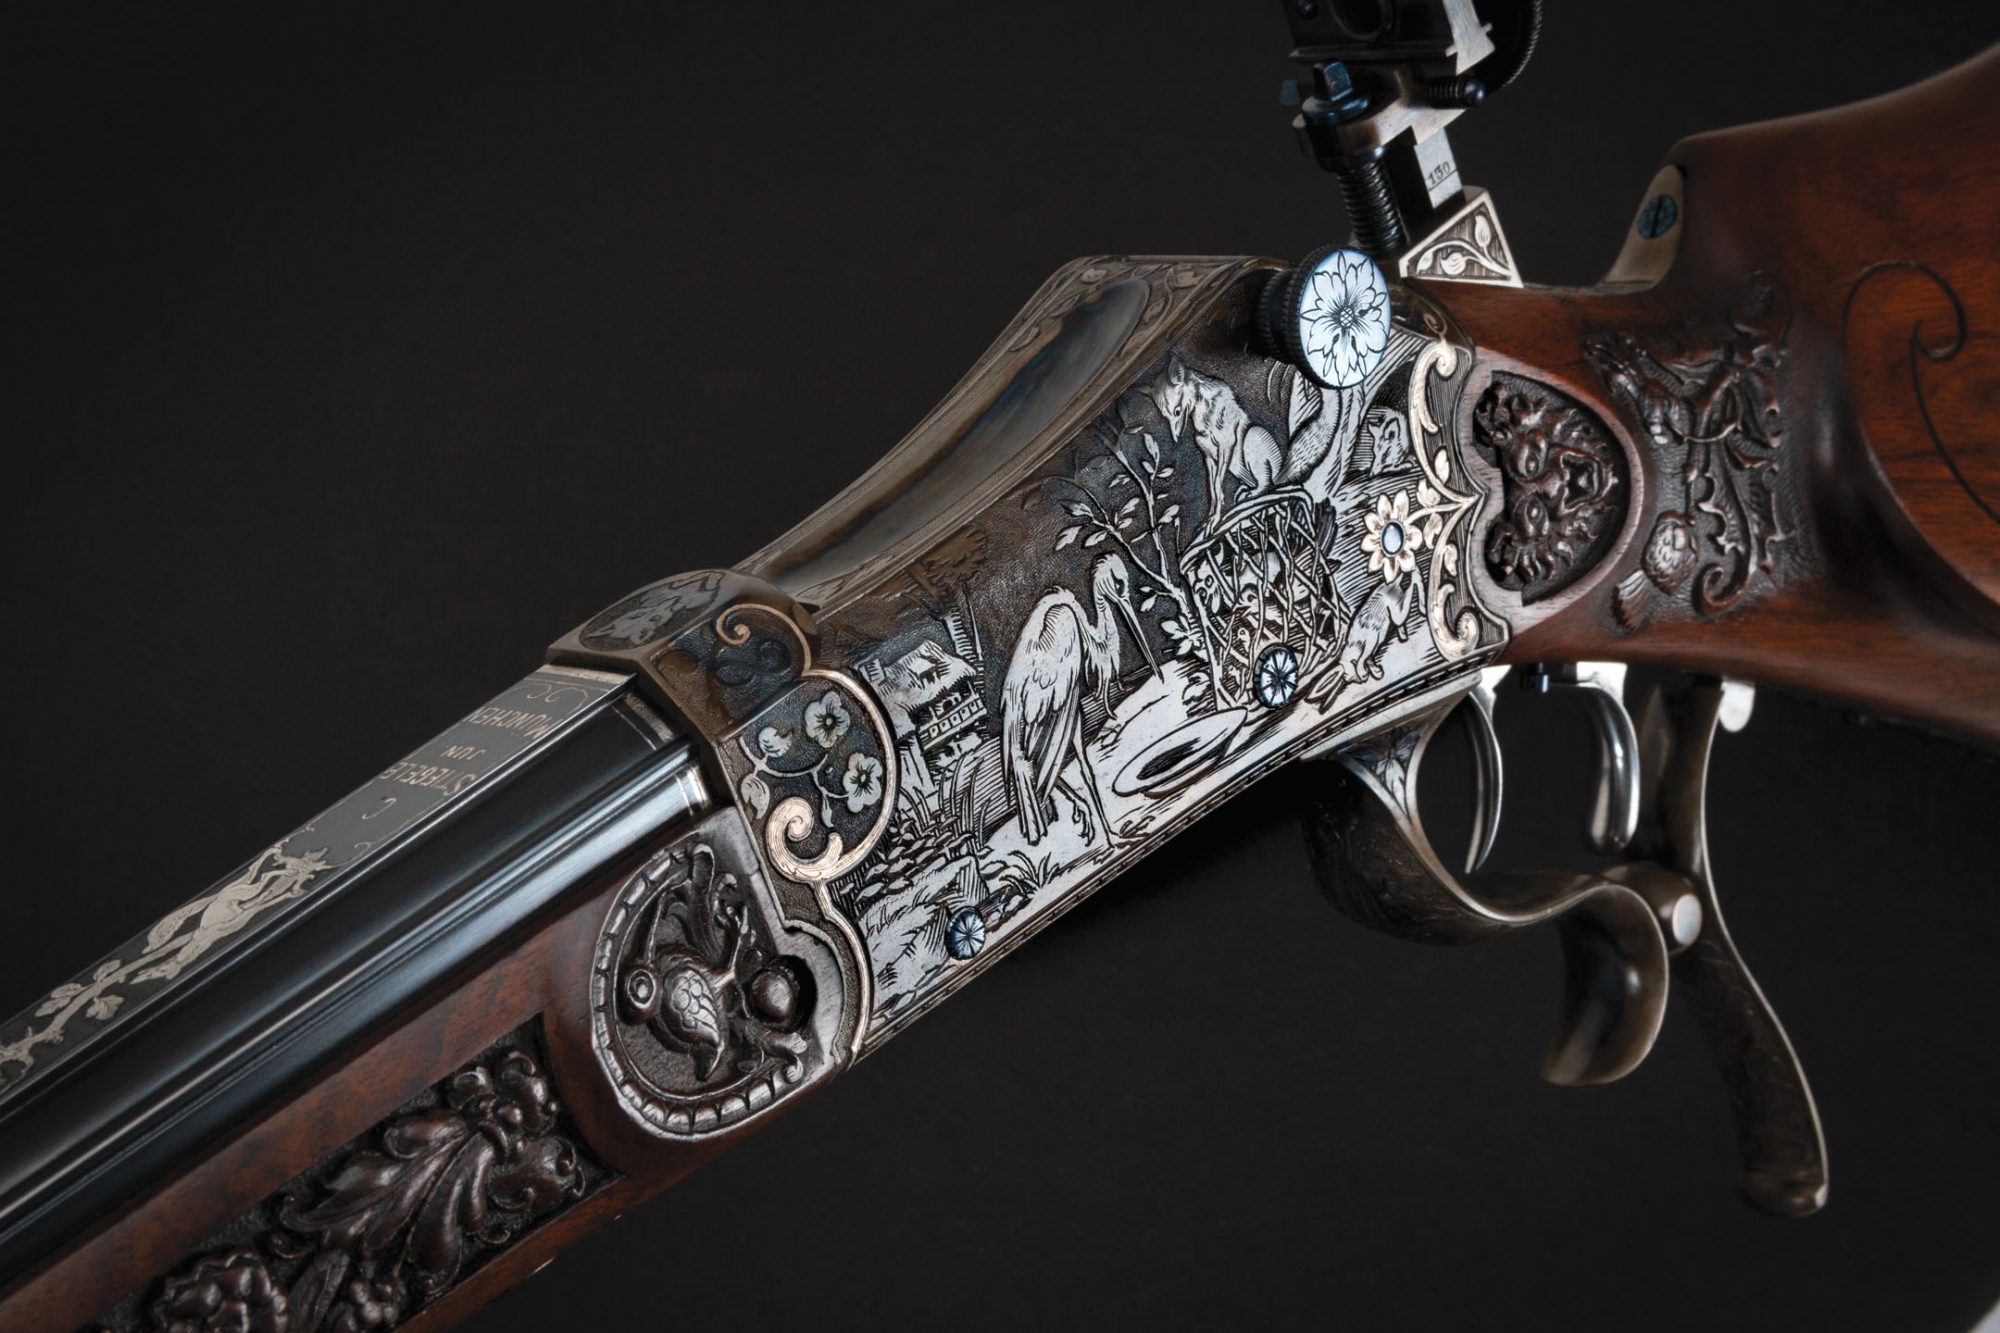 Photo of an engraved German martini style rifle after restoration by Turnbull Restoration Co. of Bloomfield, NY